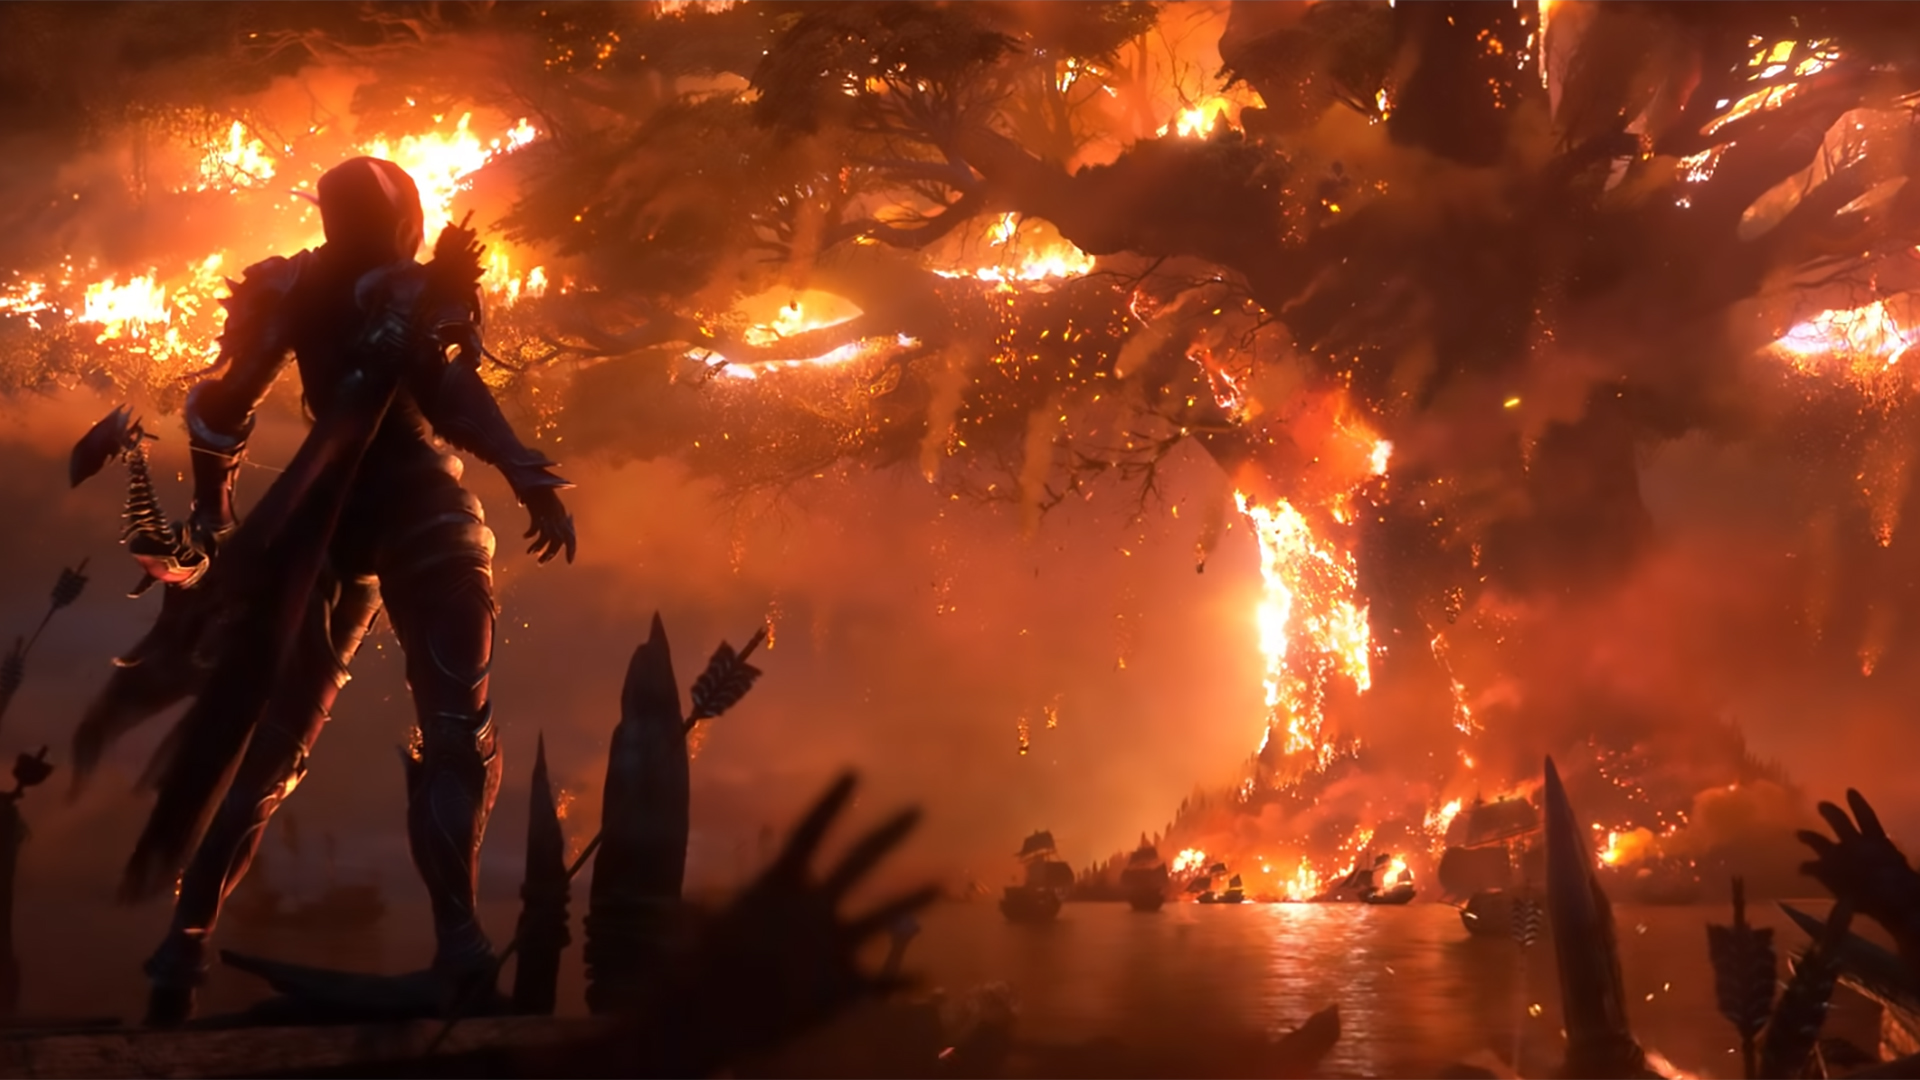 Why the Battle for Azeroth is happening A quick WoW lore primer